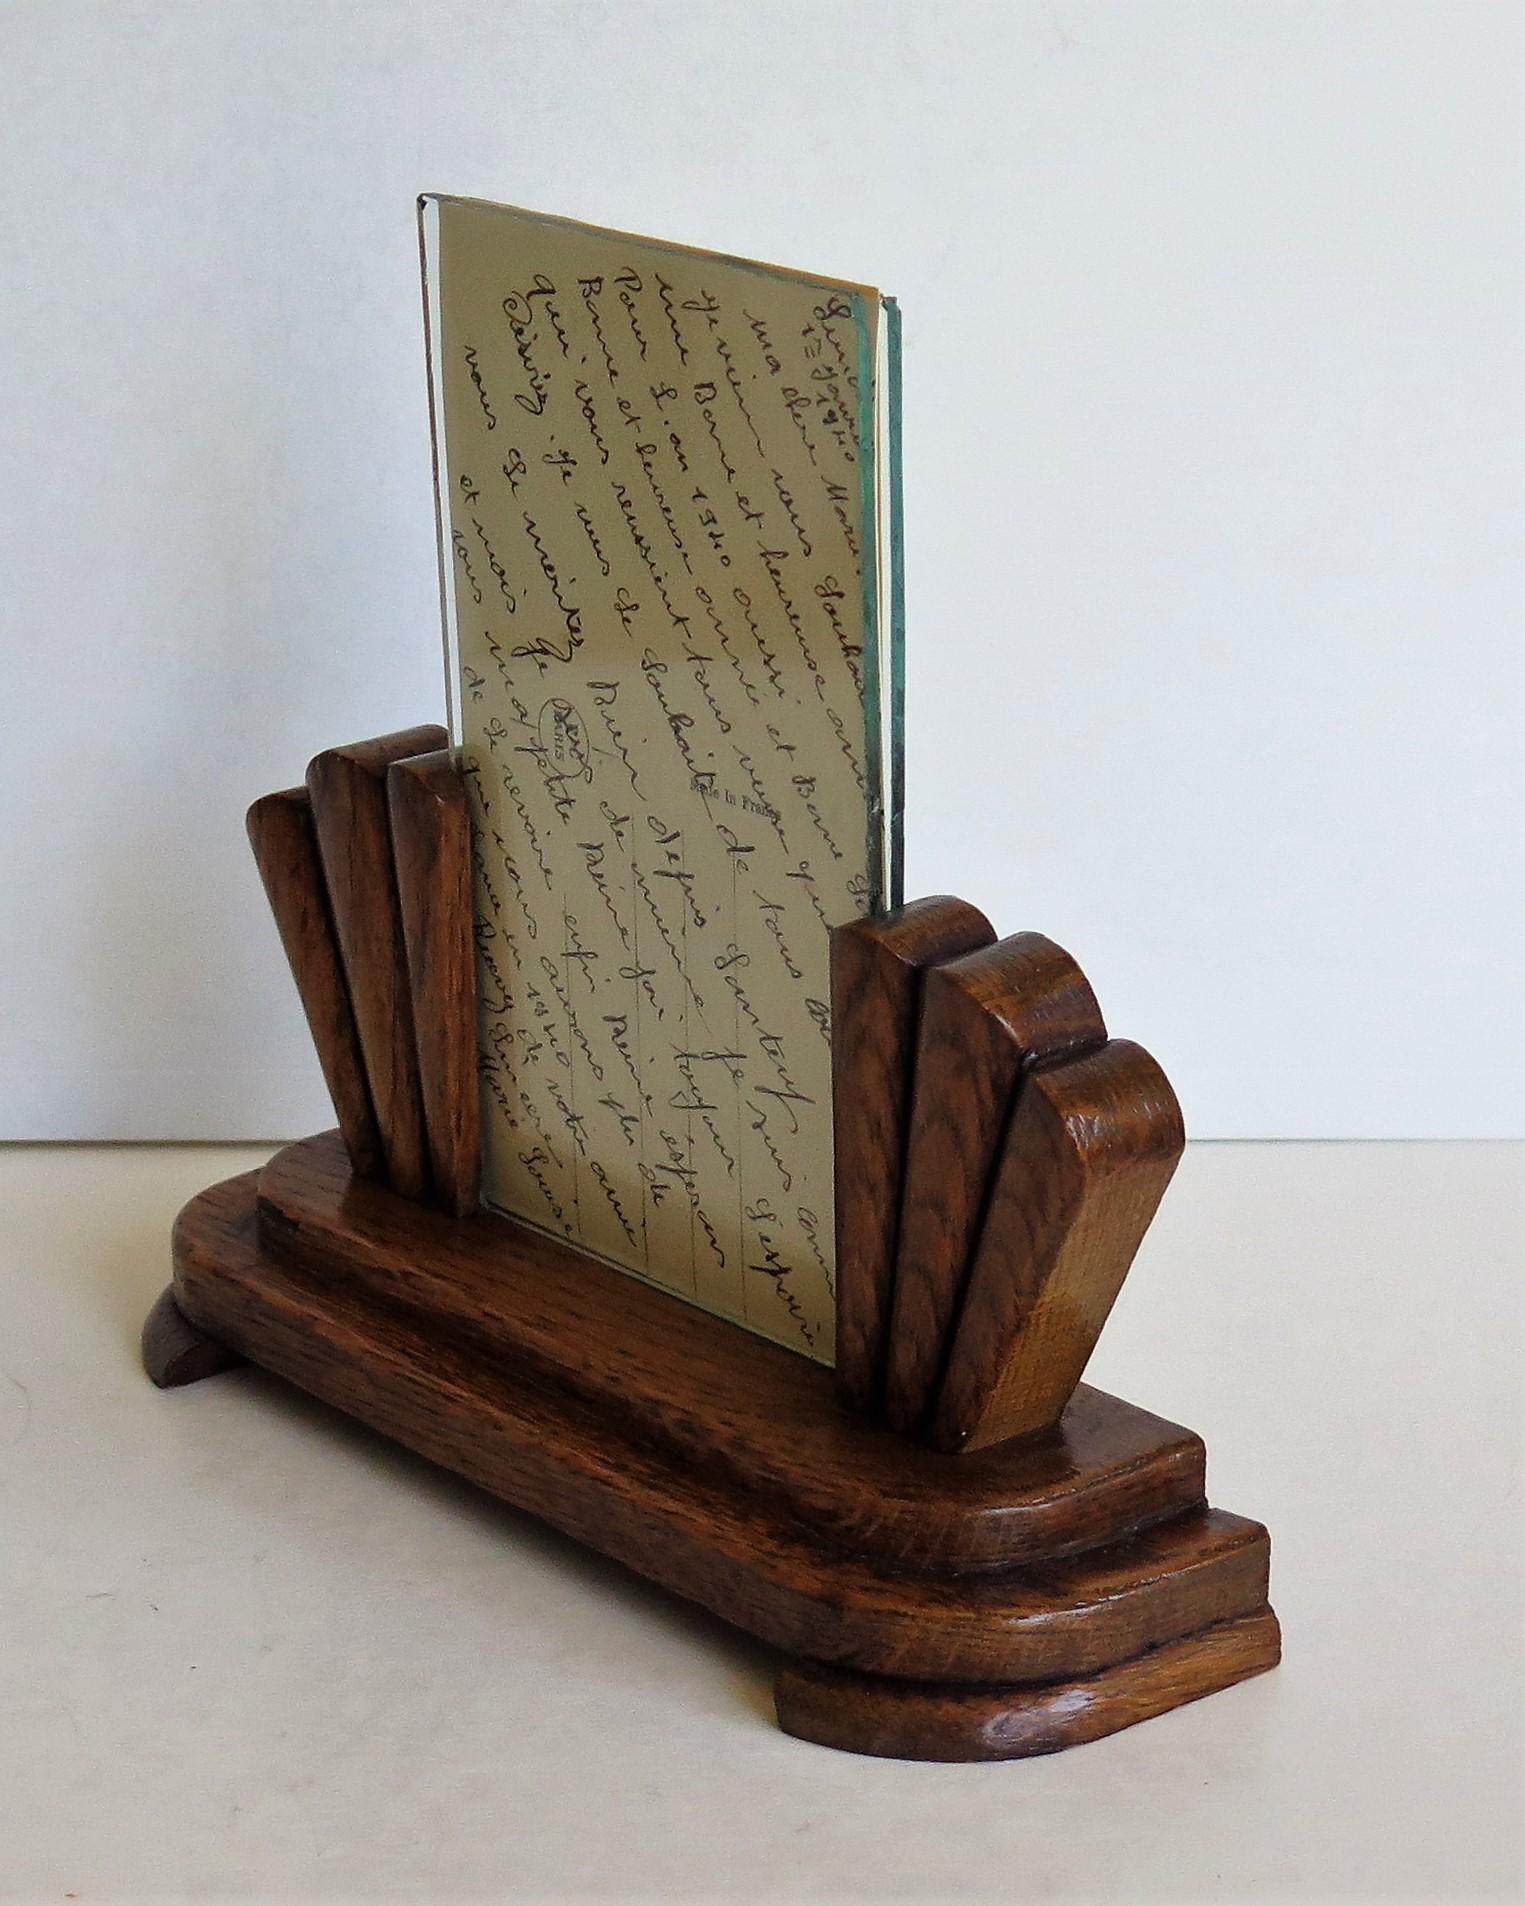 20th Century Art Deco Period Photo Frame Handmade in Oak with Fan Sides, circa 1930